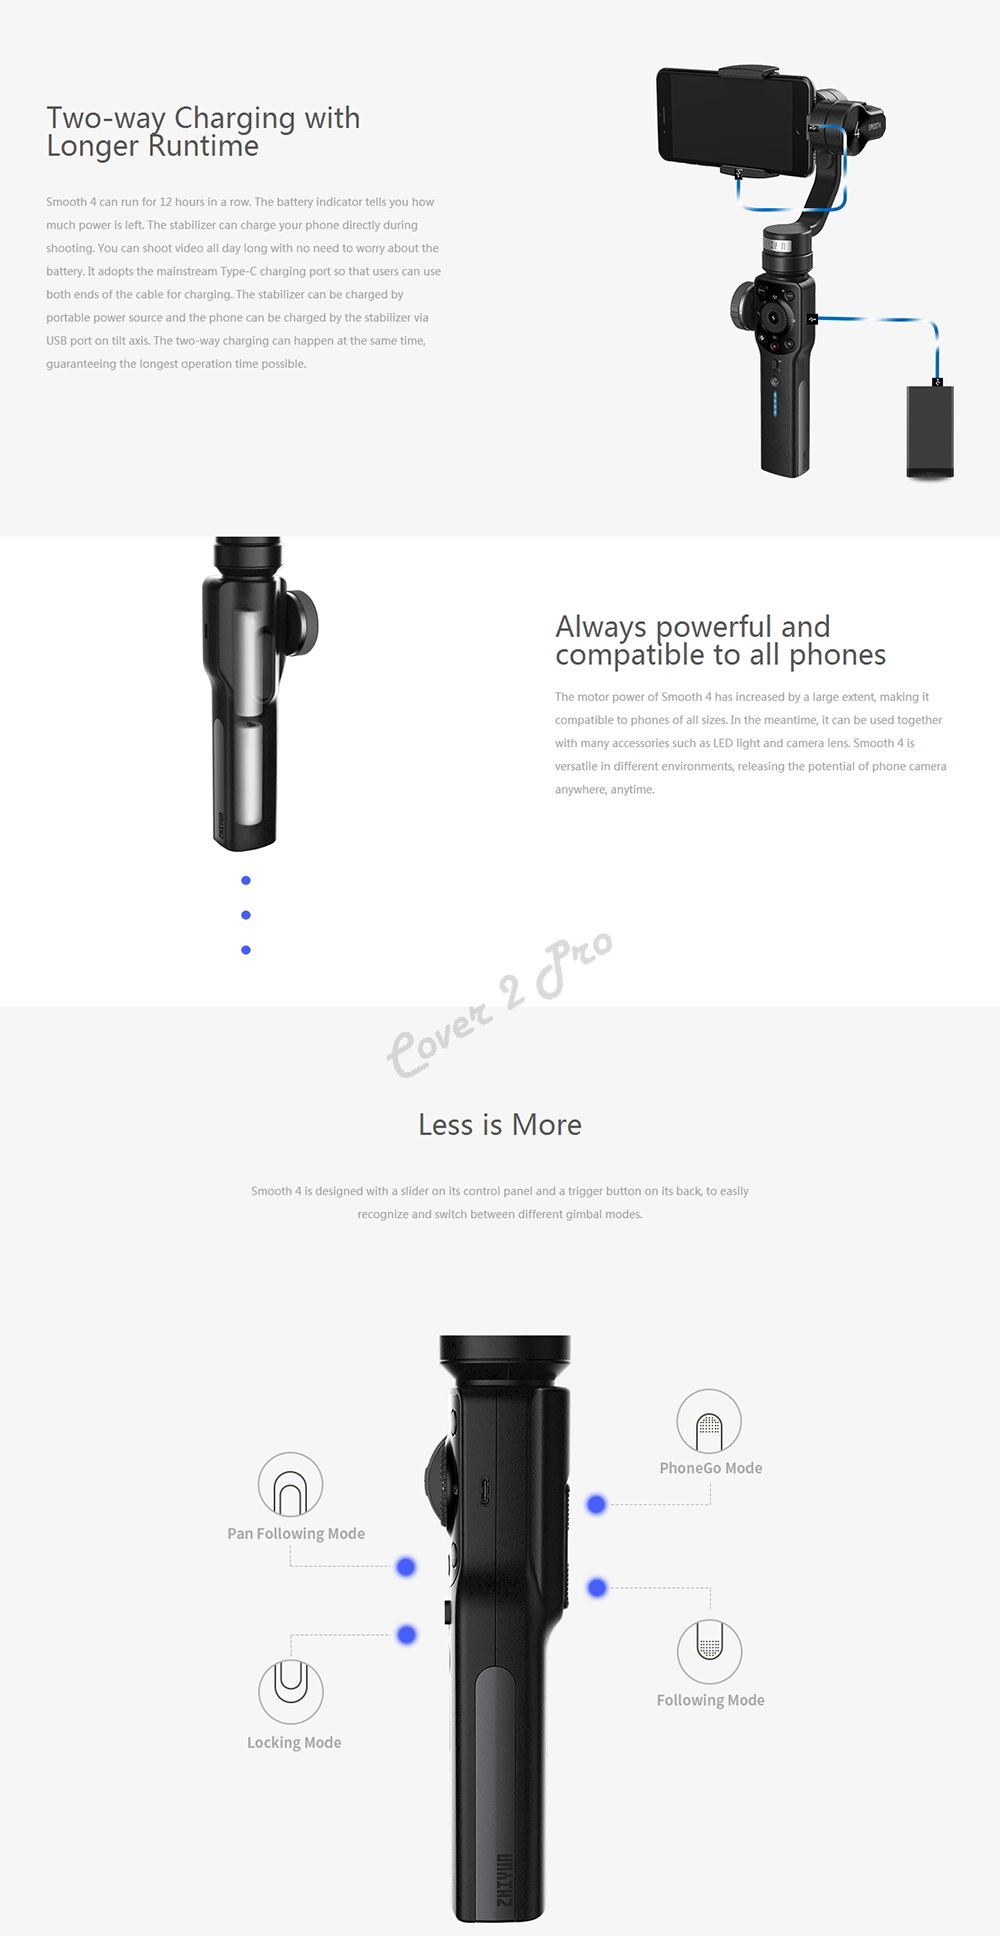 Zhiyun Smooth 4 3-Axis Handheld Gimbal Stabilizer for Smartphone